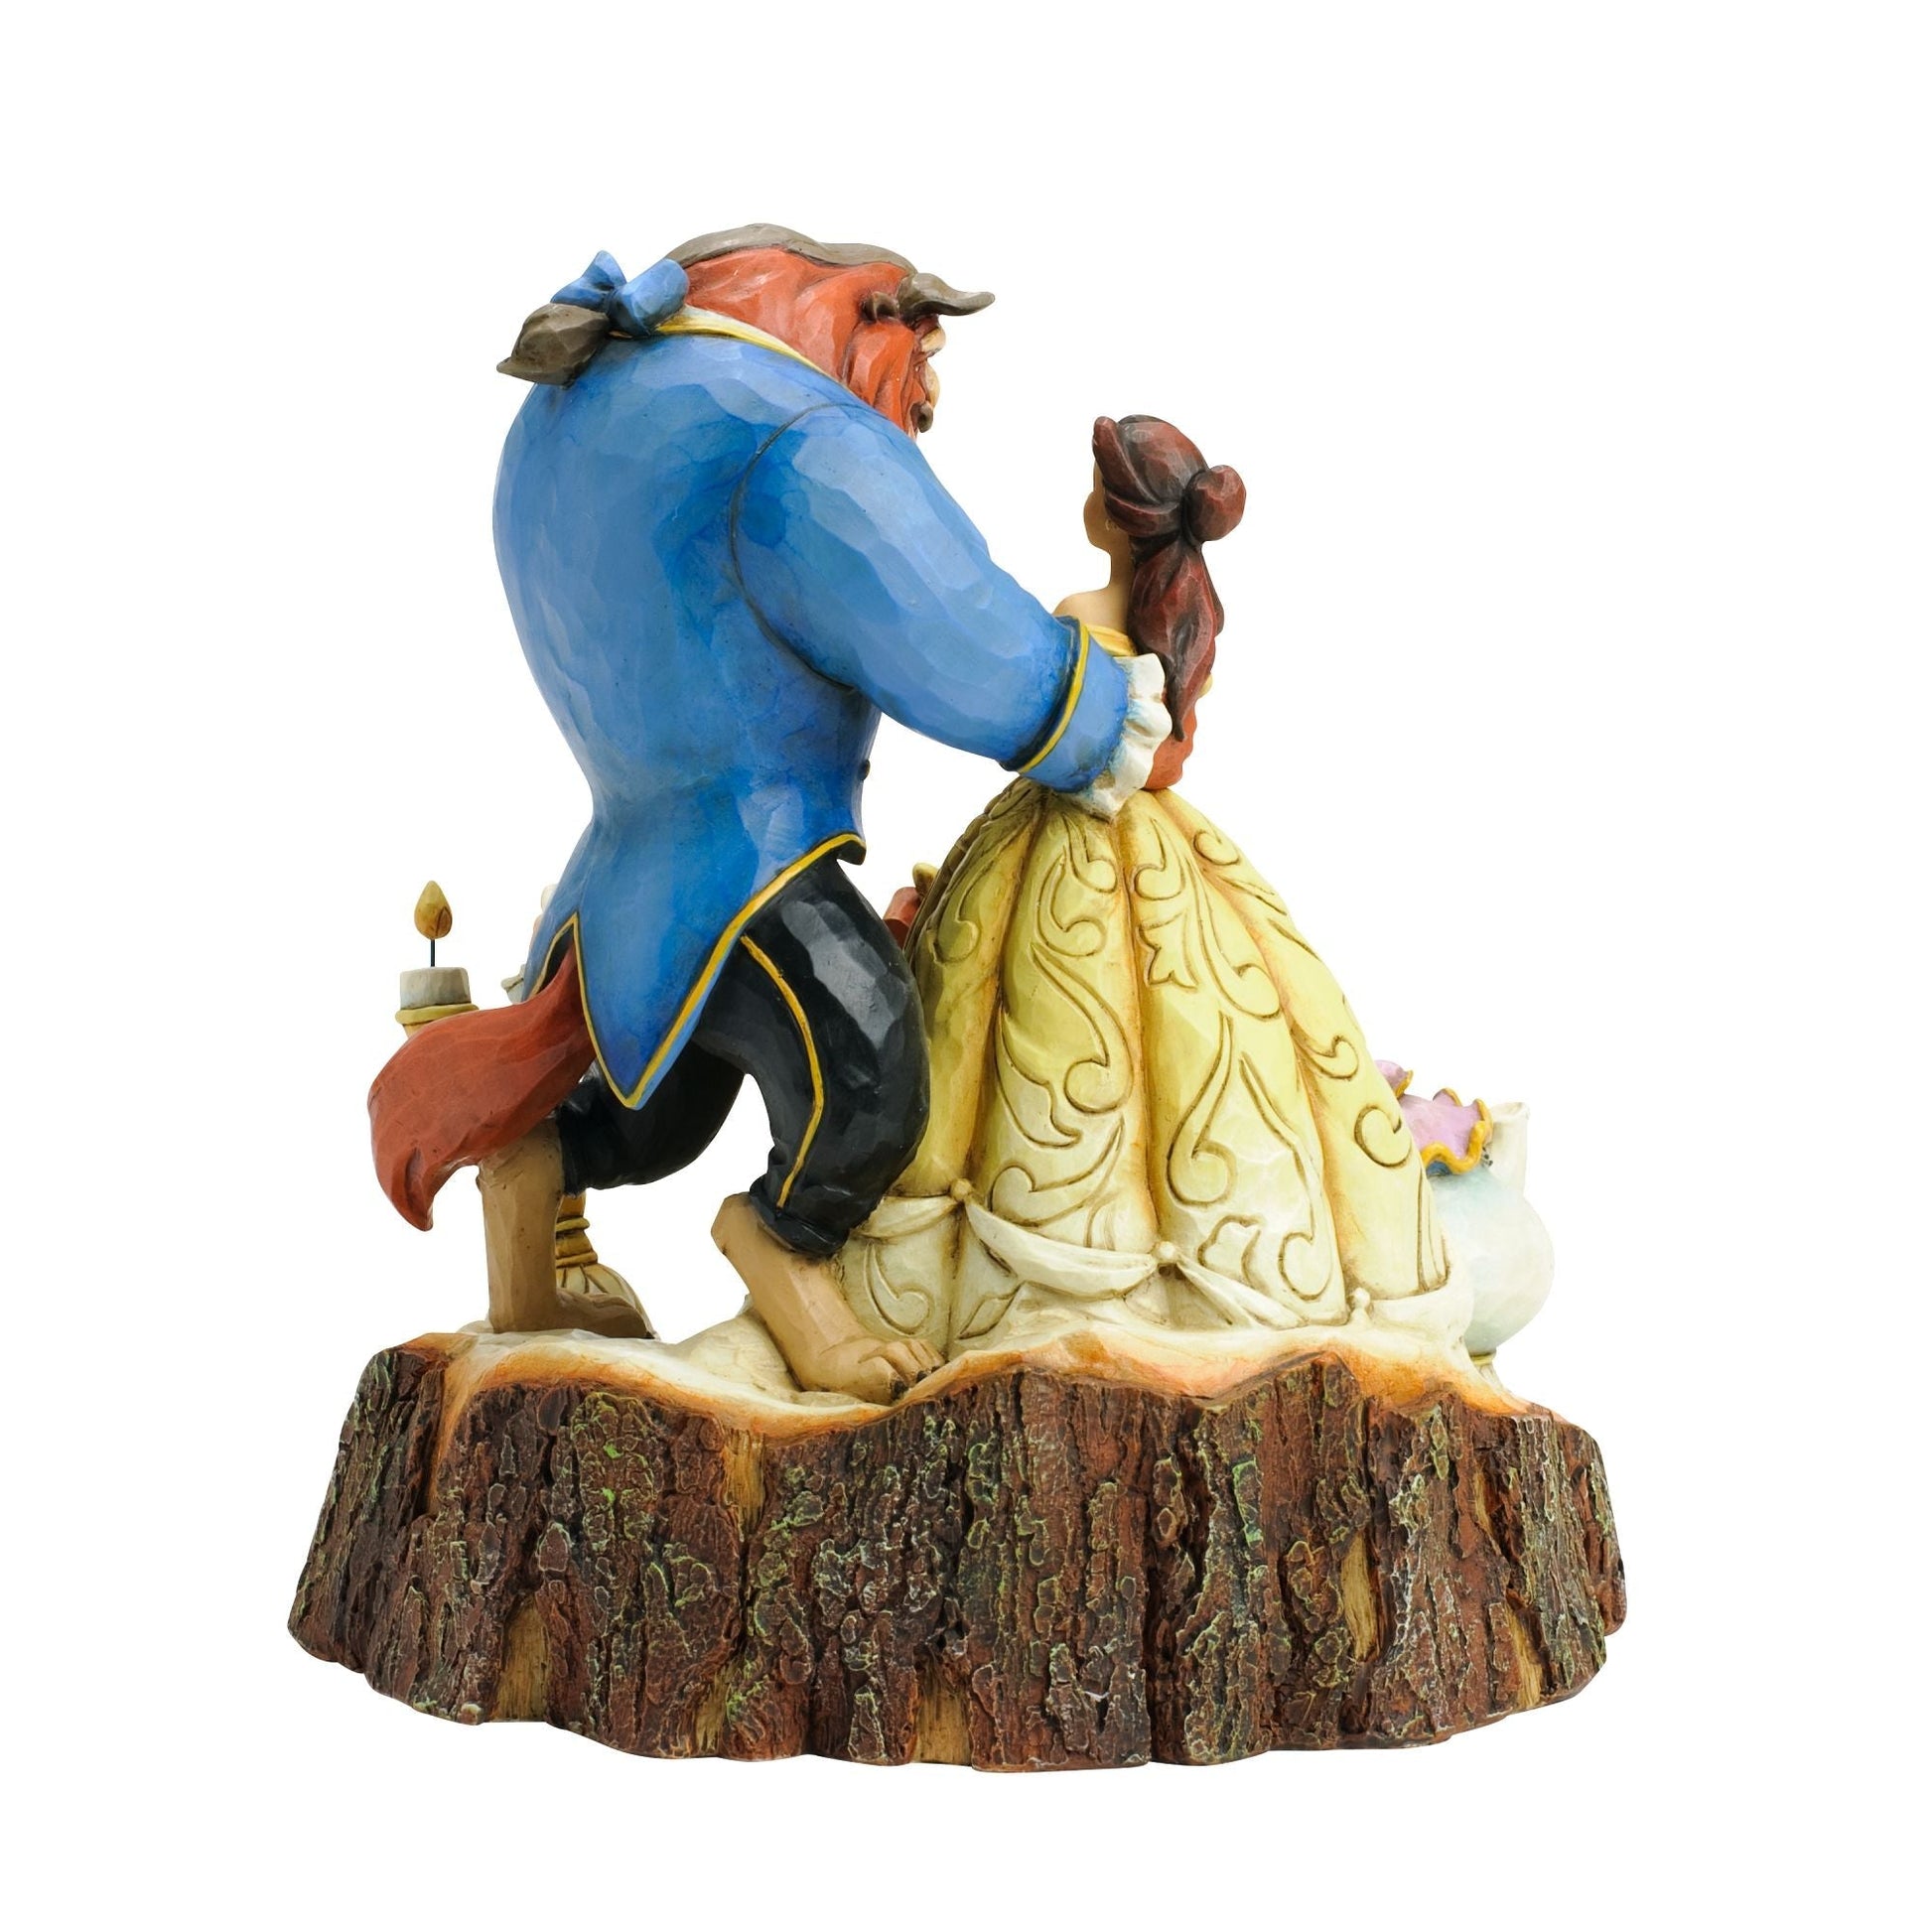 Disney Traditions by Jim Shore Beauty and the Beast Carved by Heart Figurine